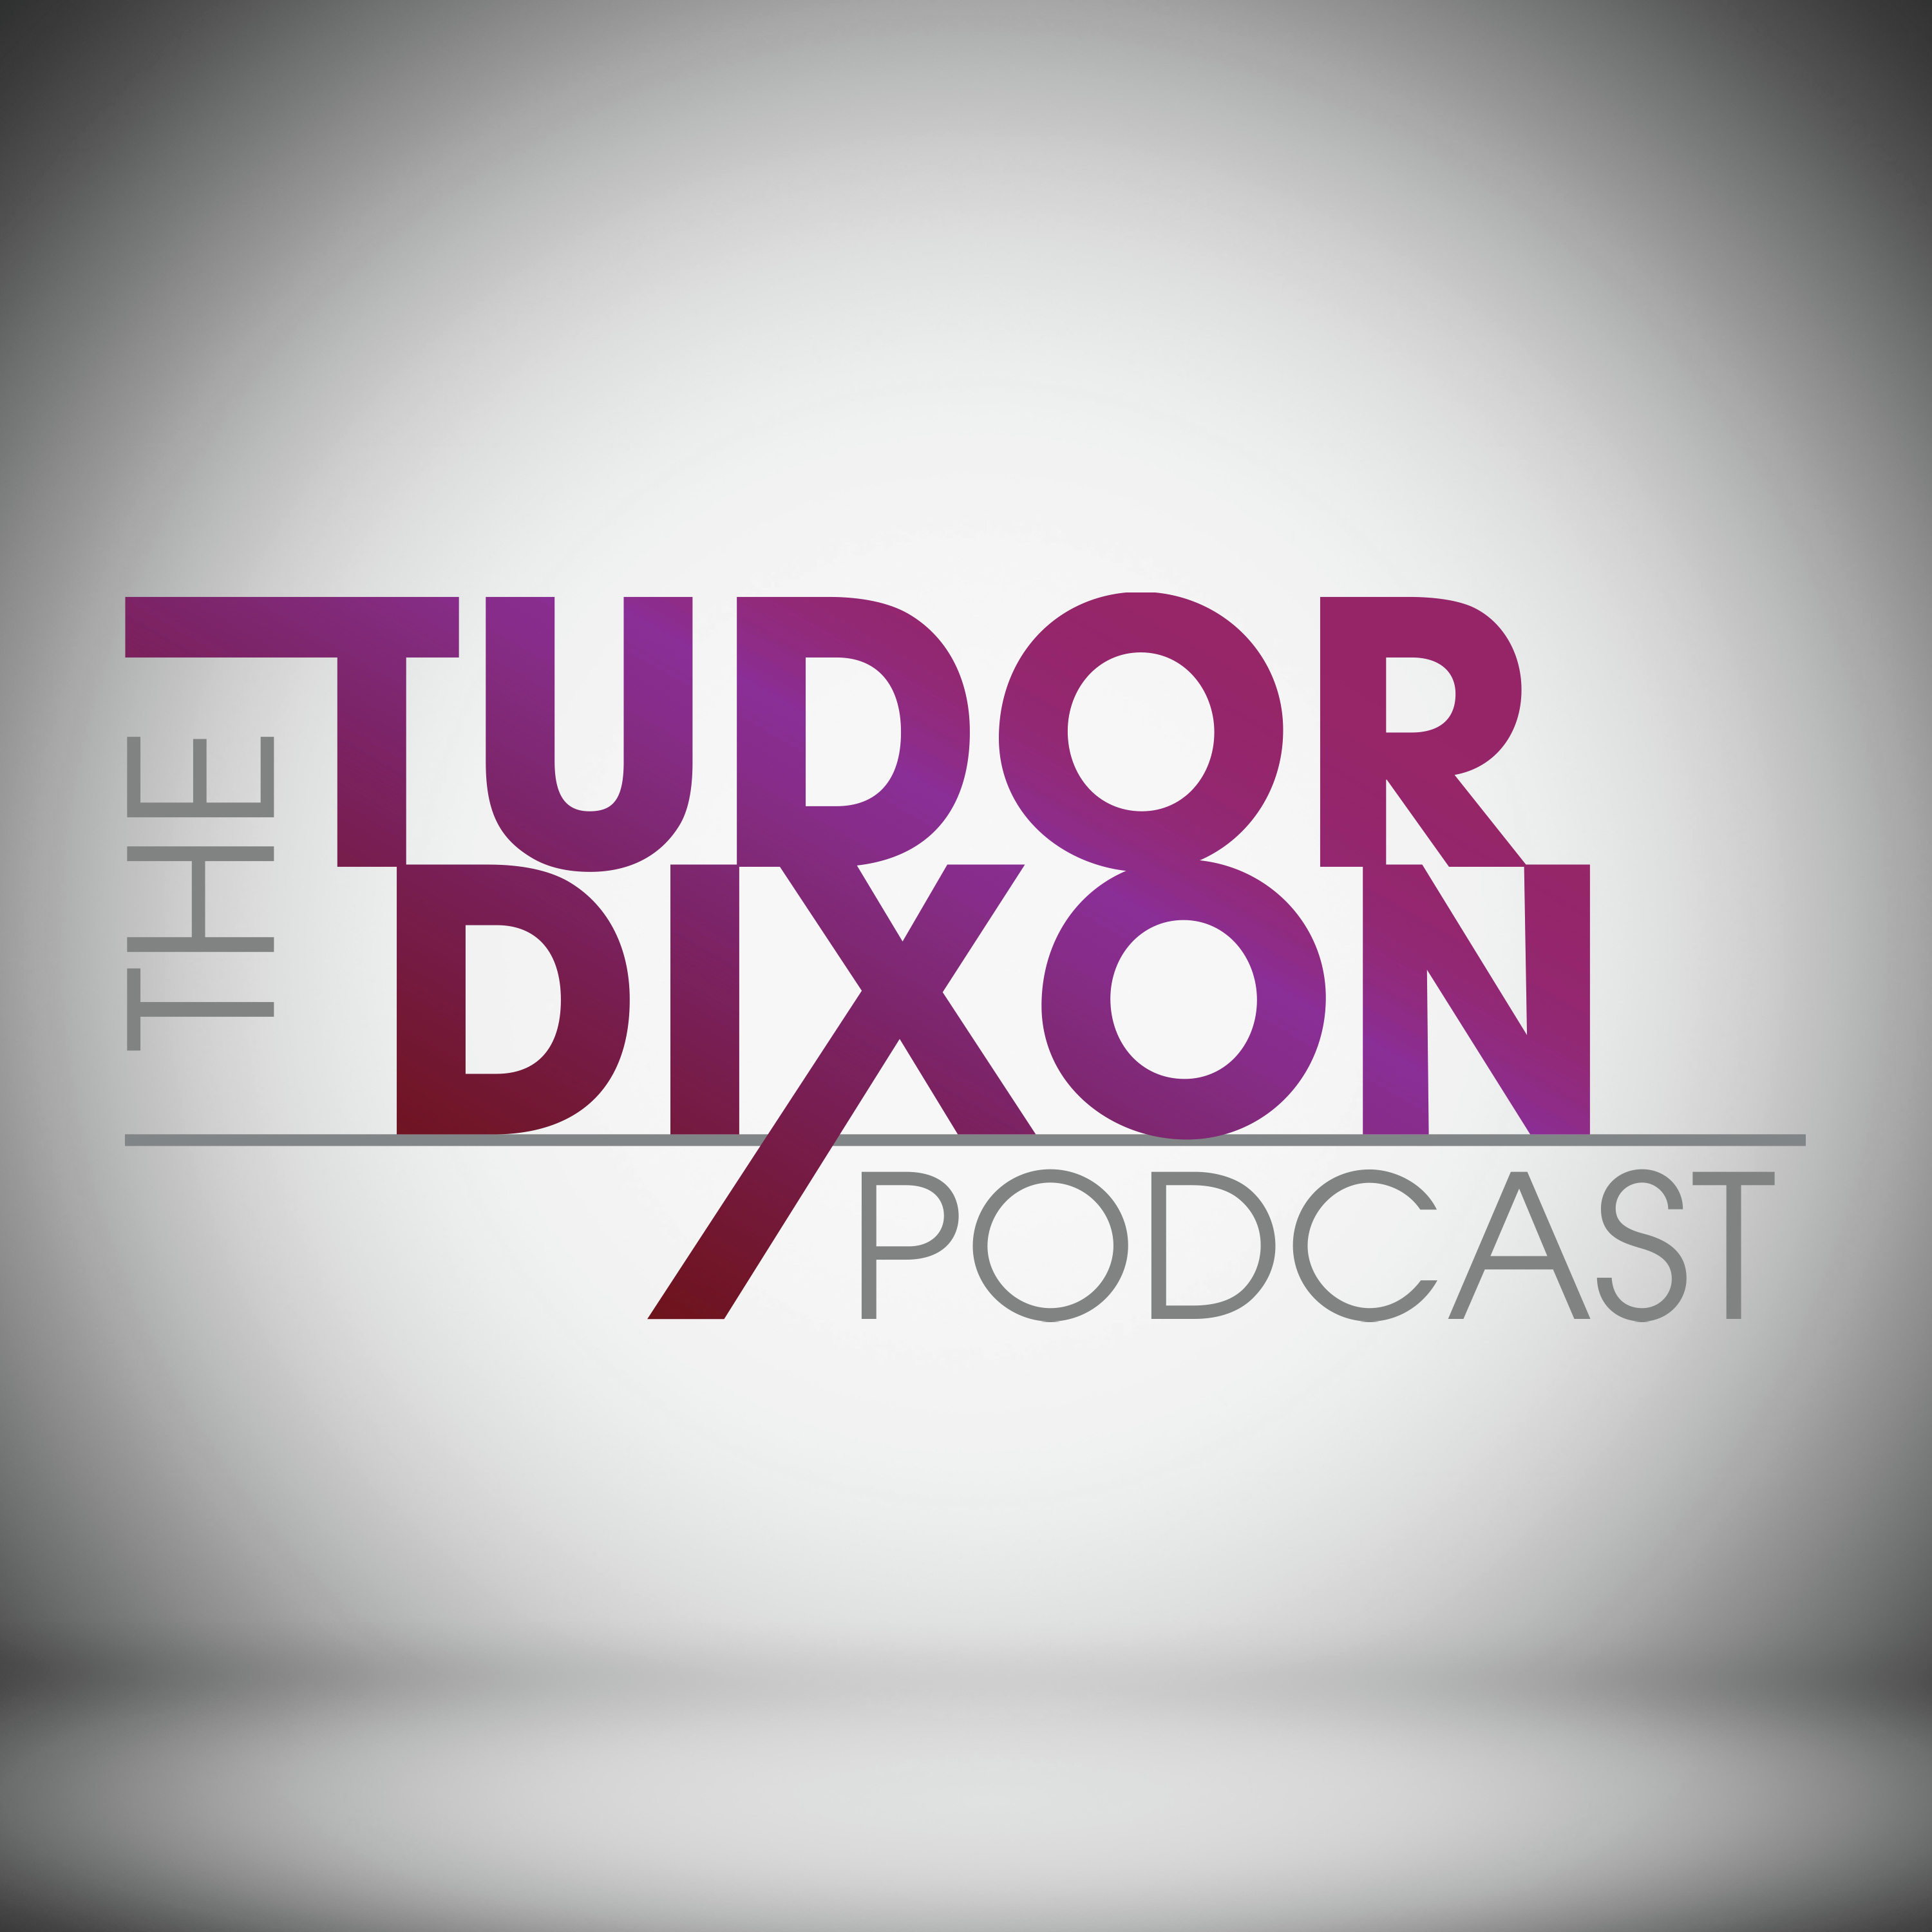 The Tudor Dixon Podcast: Gratitude and Support for Law Enforcement